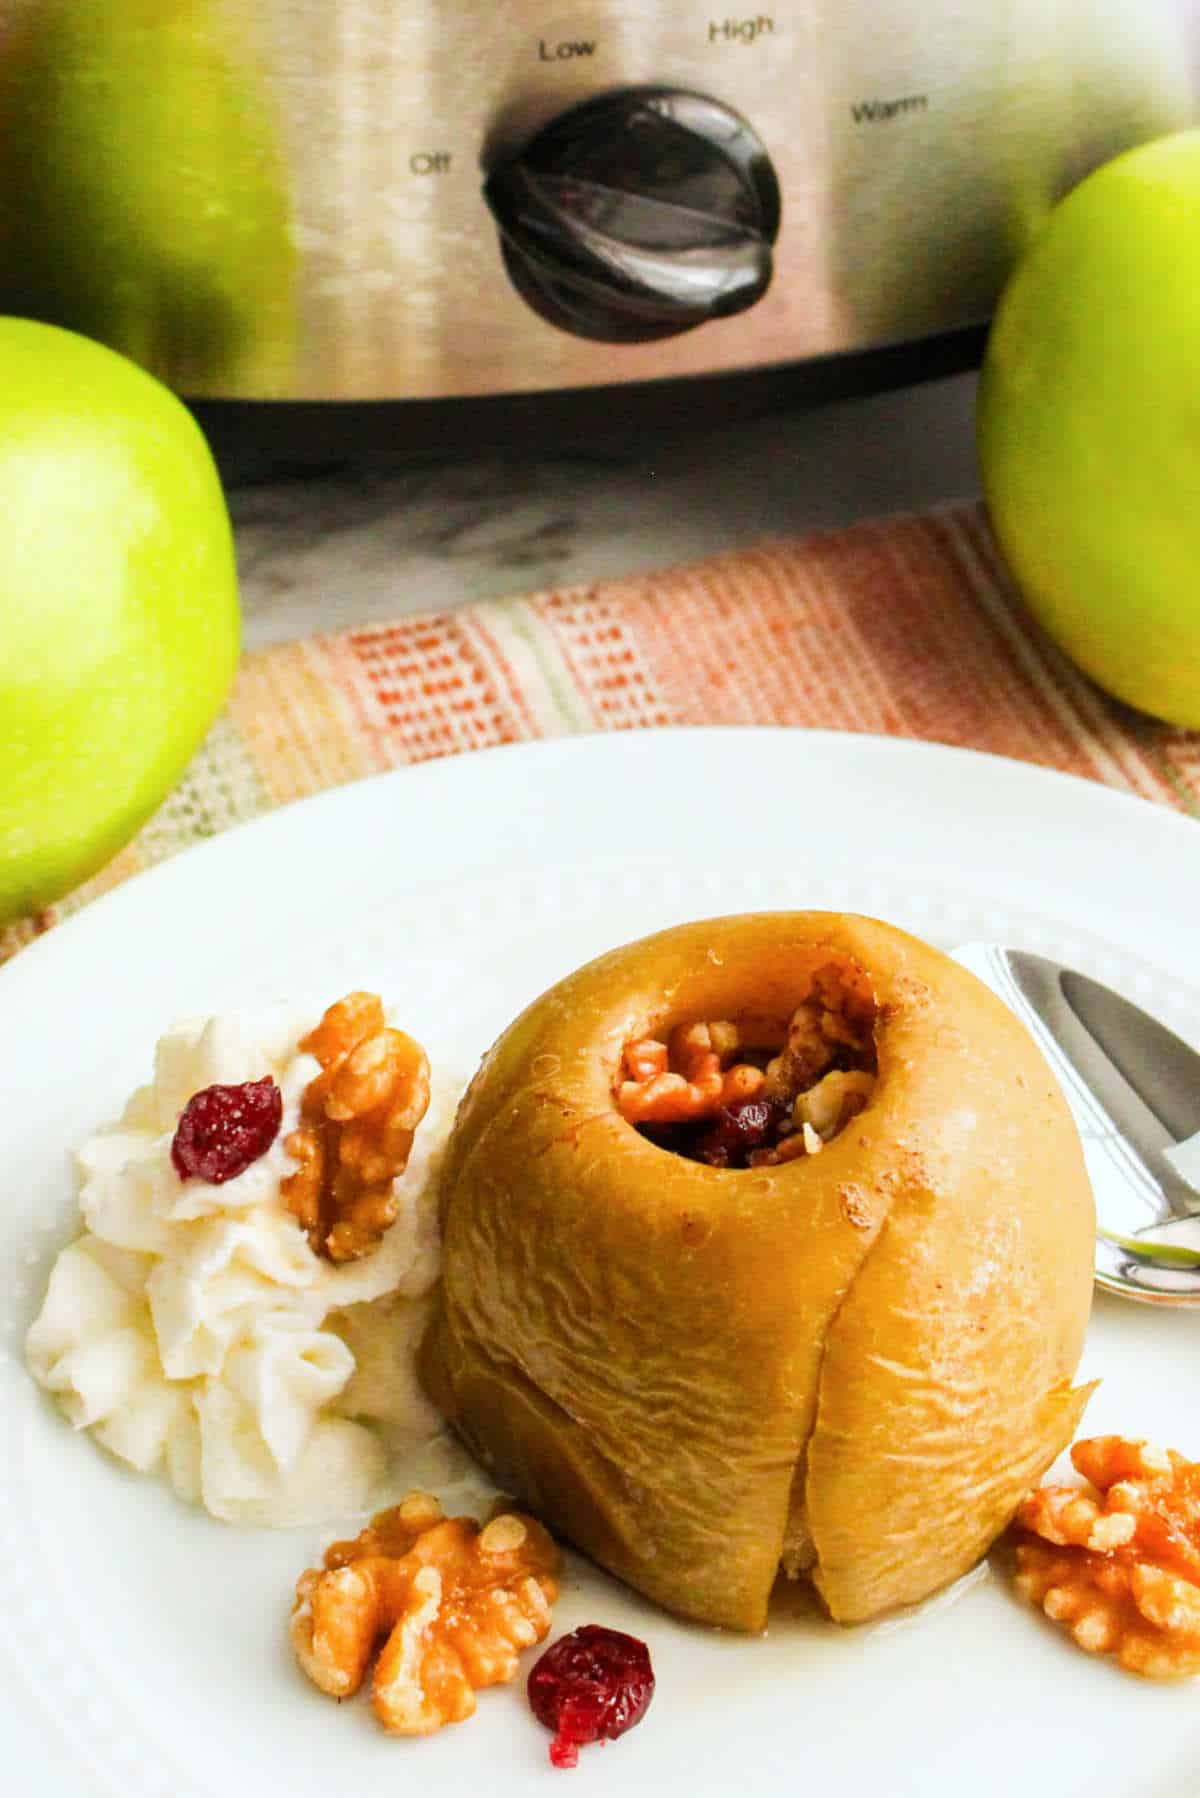 baked apples with walnuts and cranberriesPerfect for Crocktober.